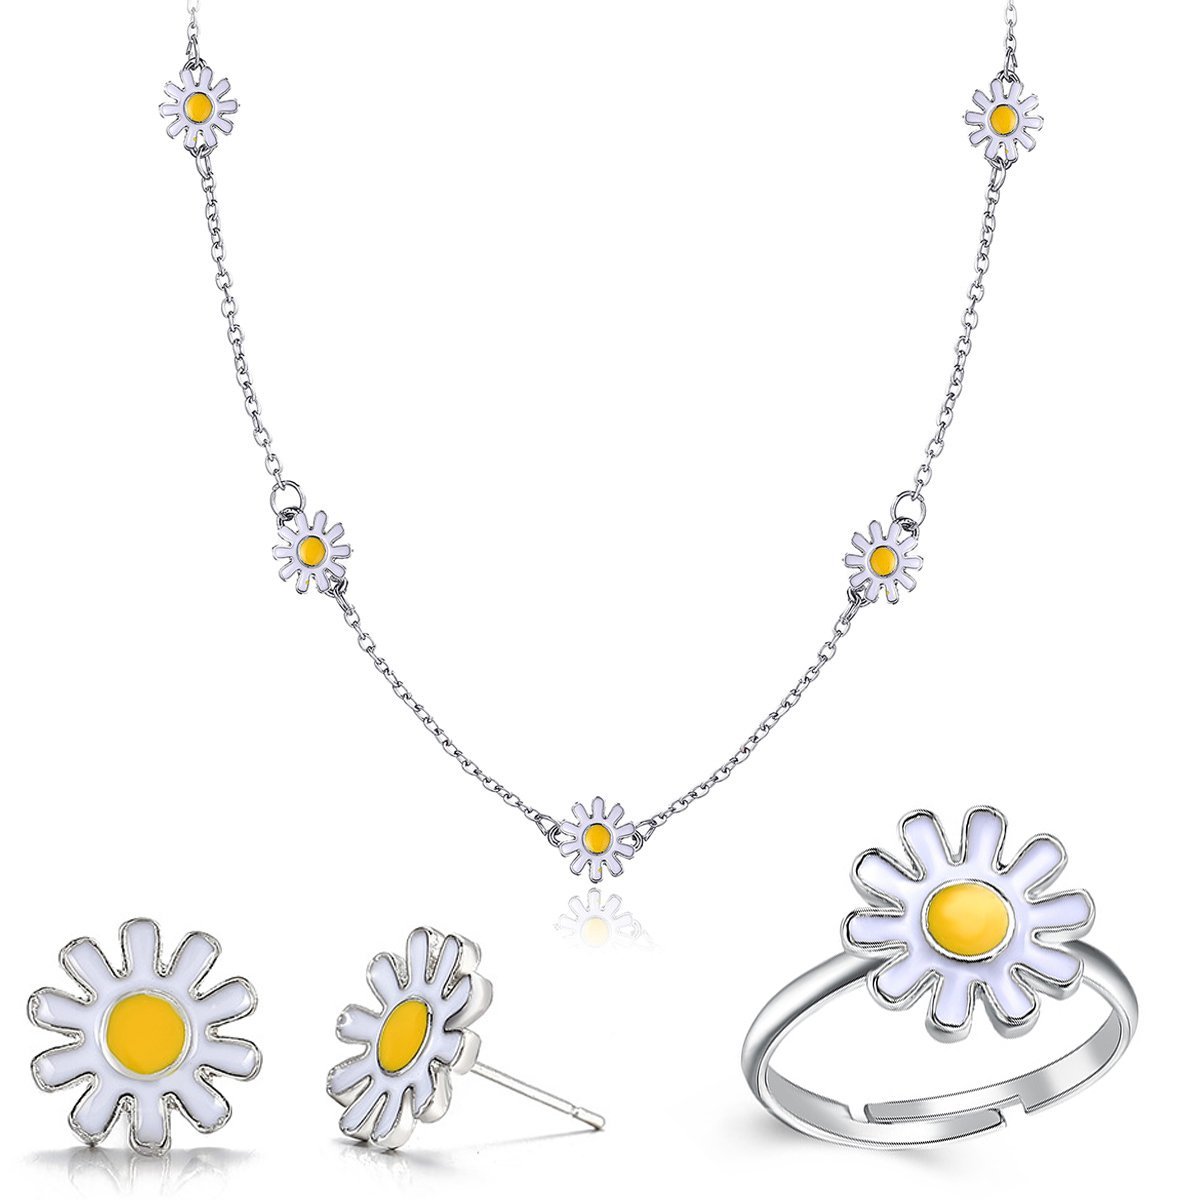 Picture of Alily Jewelry HZS-S1194 Daisy Flower Jewelry Set in 18K White Gold Plated - 3 Piece